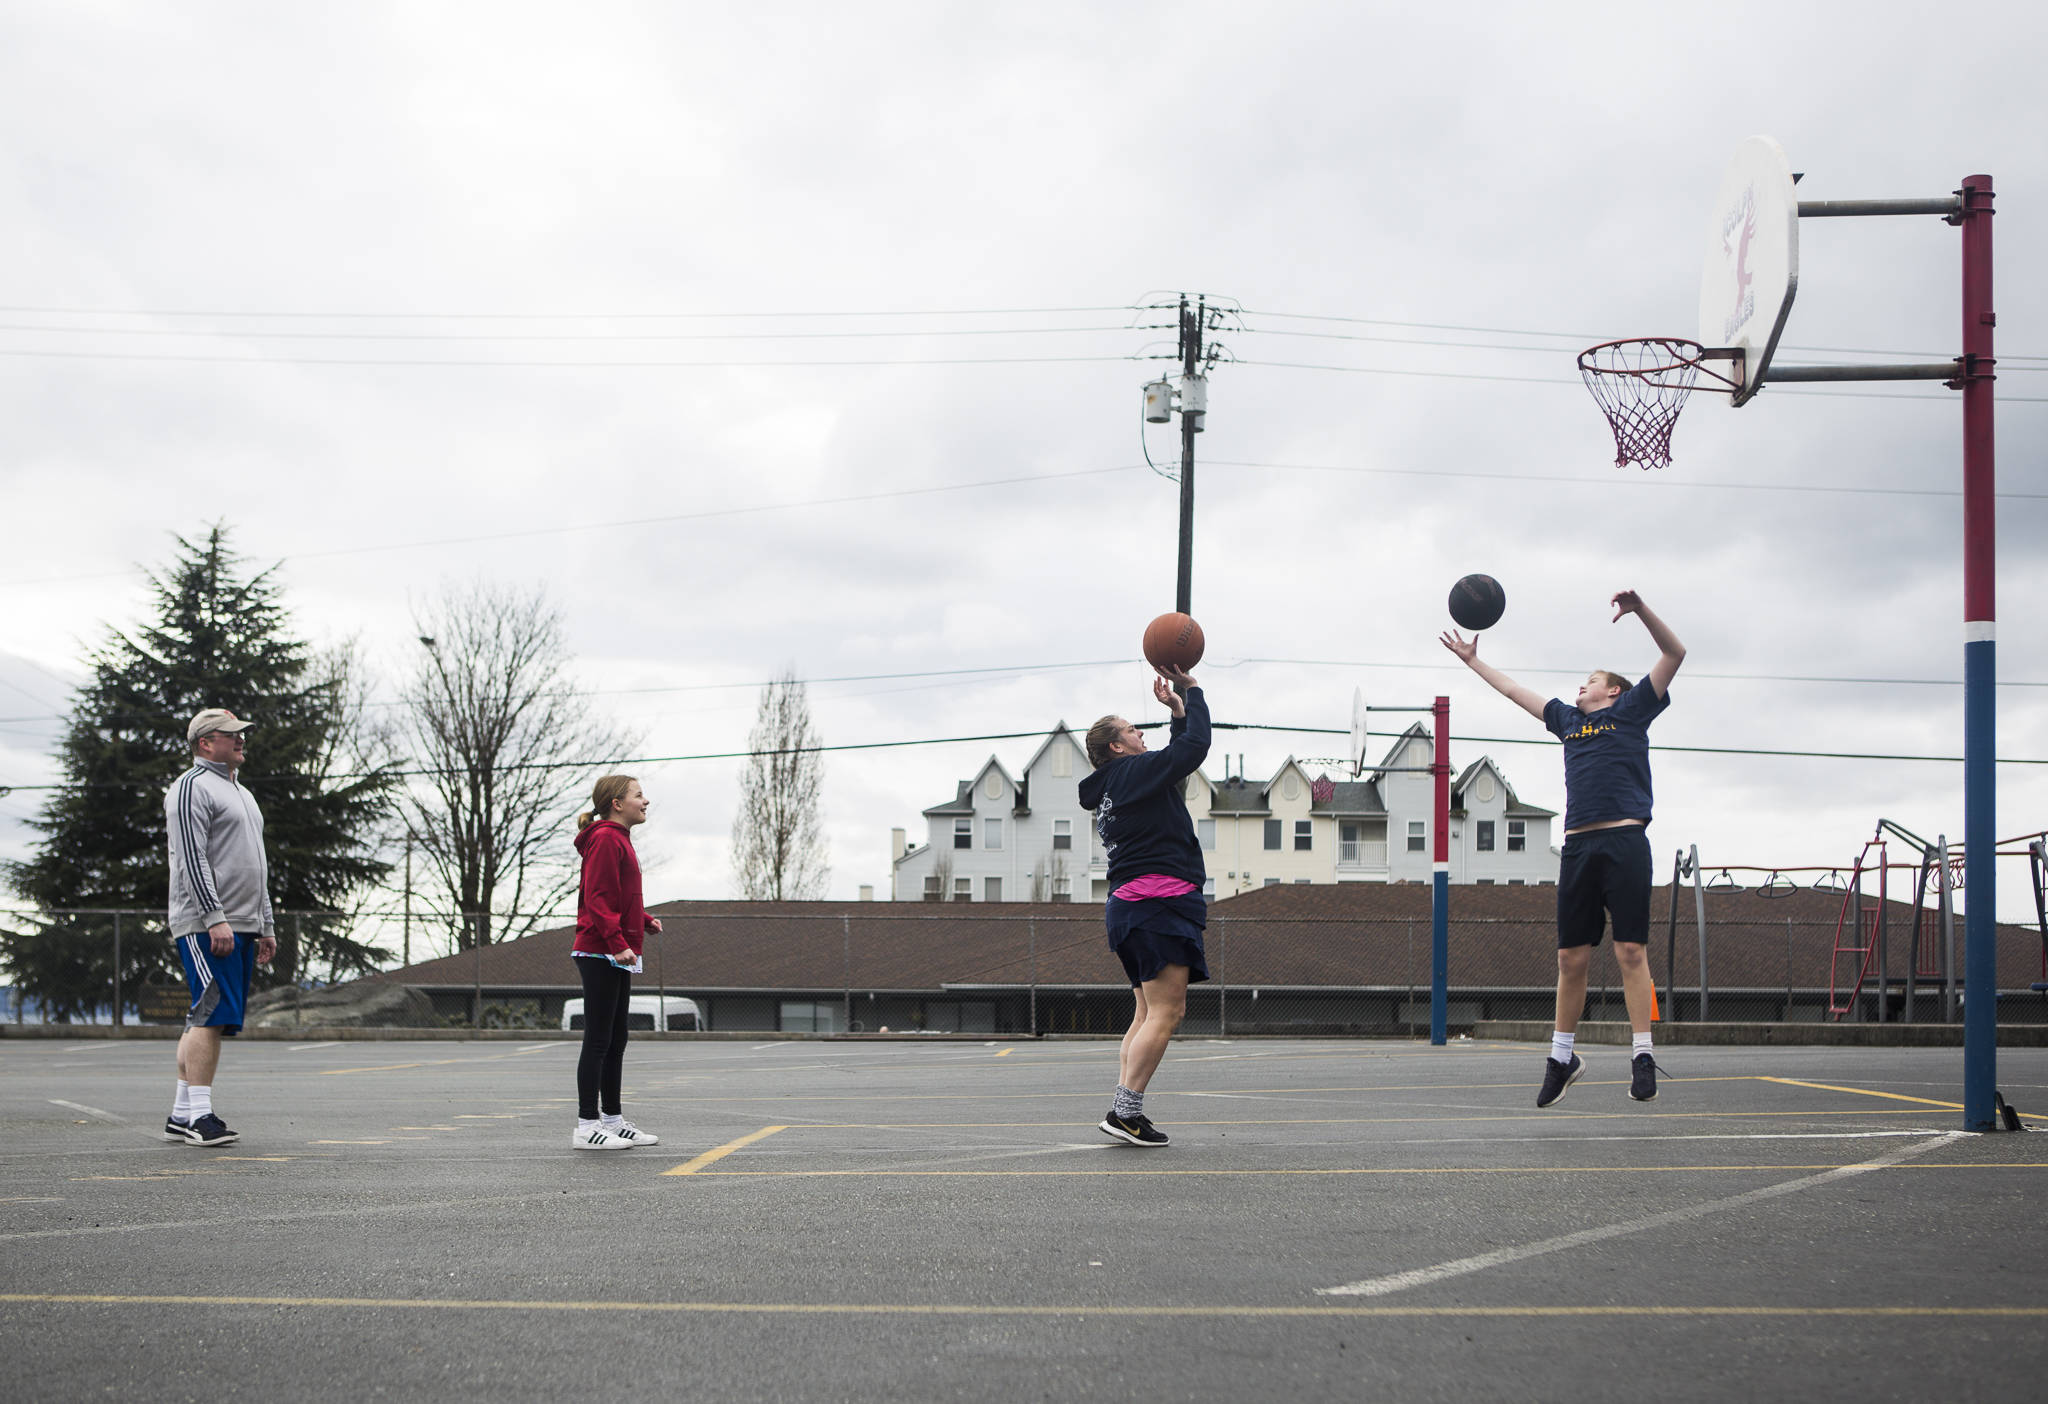 The Cook family plays bump Saturday during their “daily P.E class” that they do as a family to get out of the house in Everett. (Olivia Vanni / The Herald)